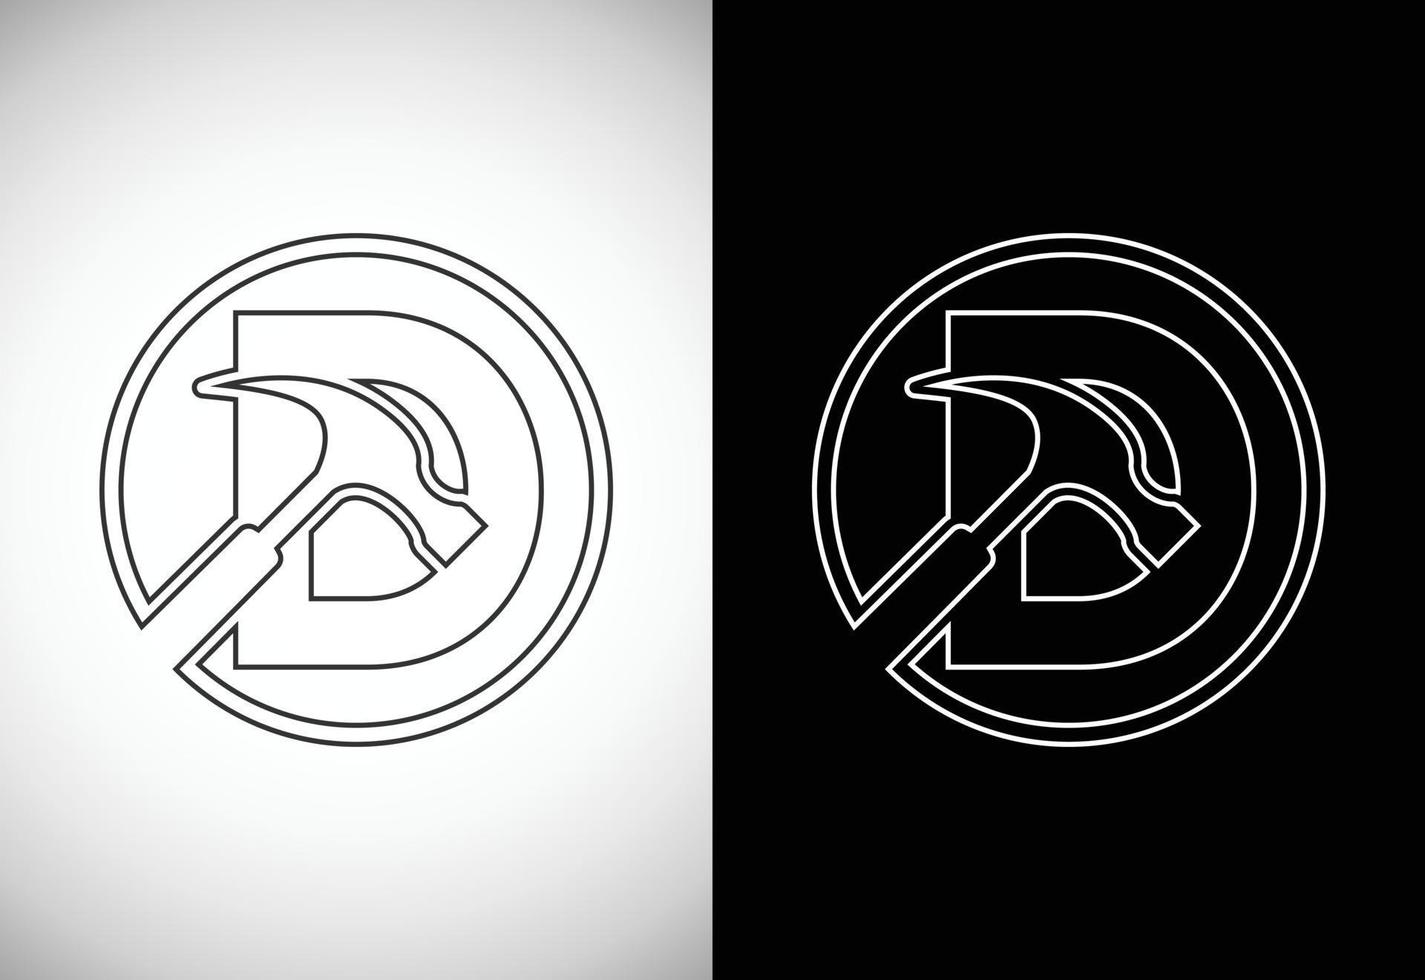 Initial D letter alphabet with a Hammer. Repair, renovation, and construction logo. Line art style logo vector